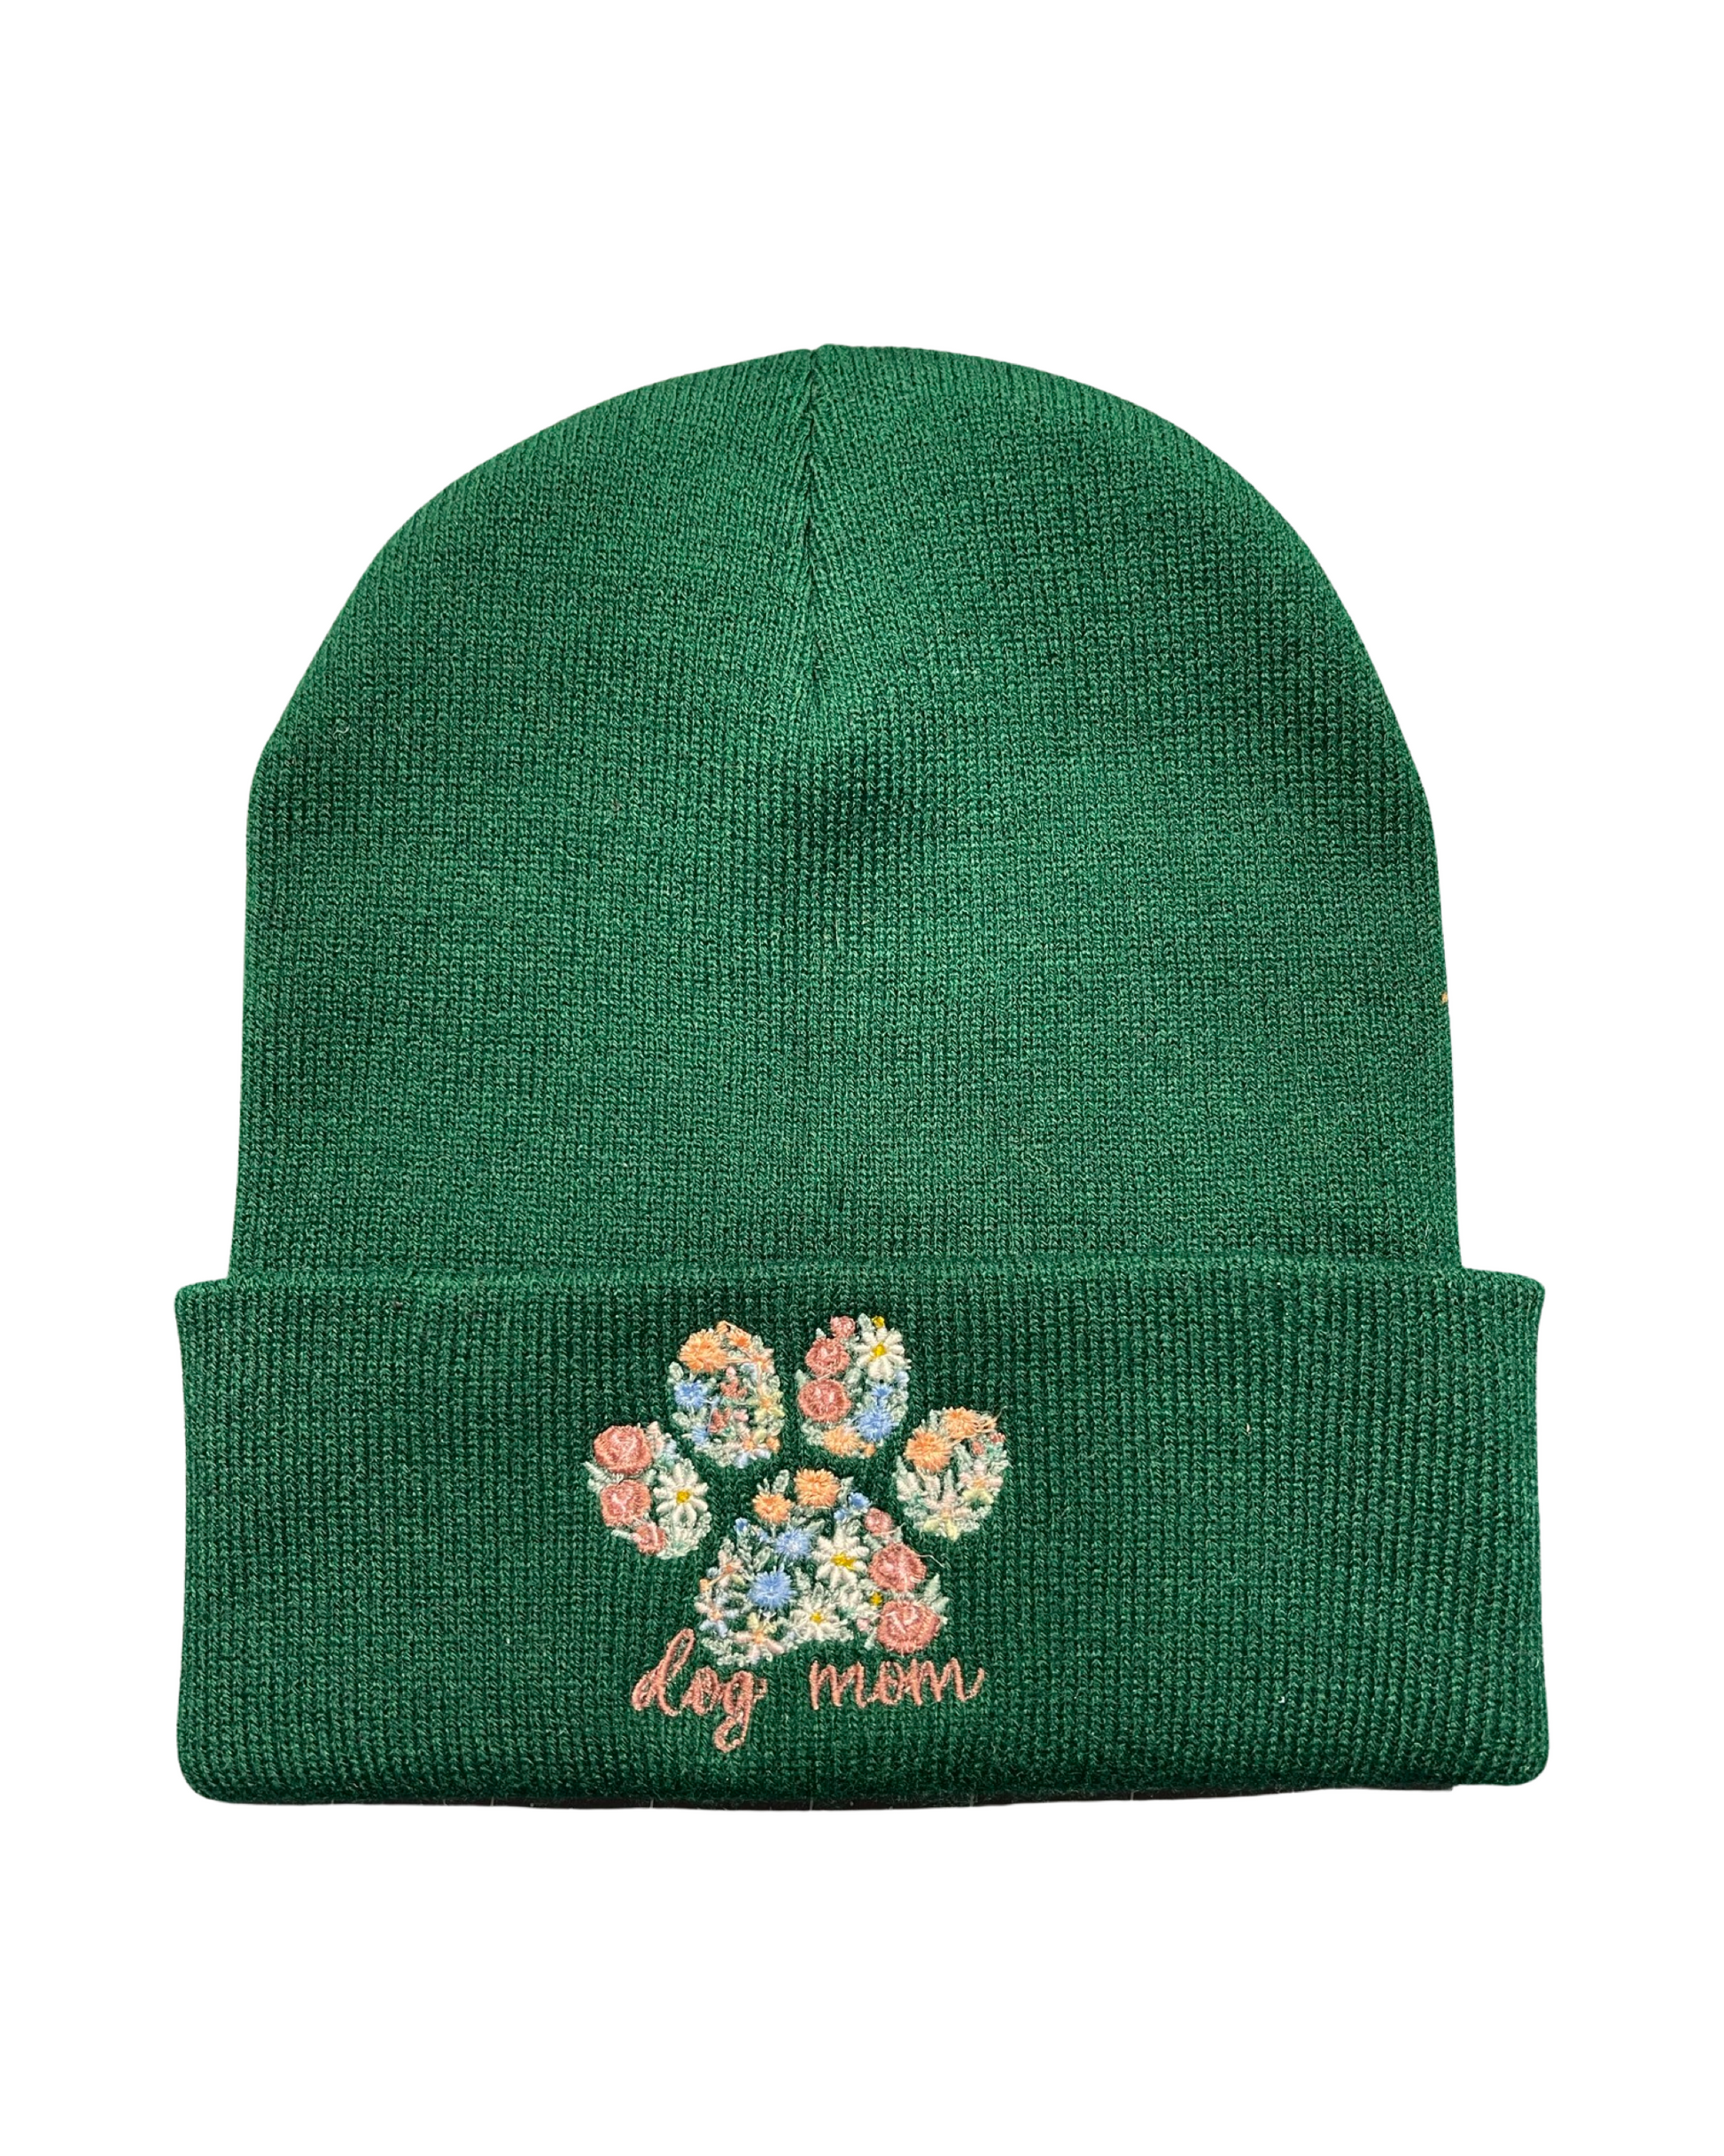 hunter green beanie embroidered with a dog paw made of various colored flowers and the words dog mom